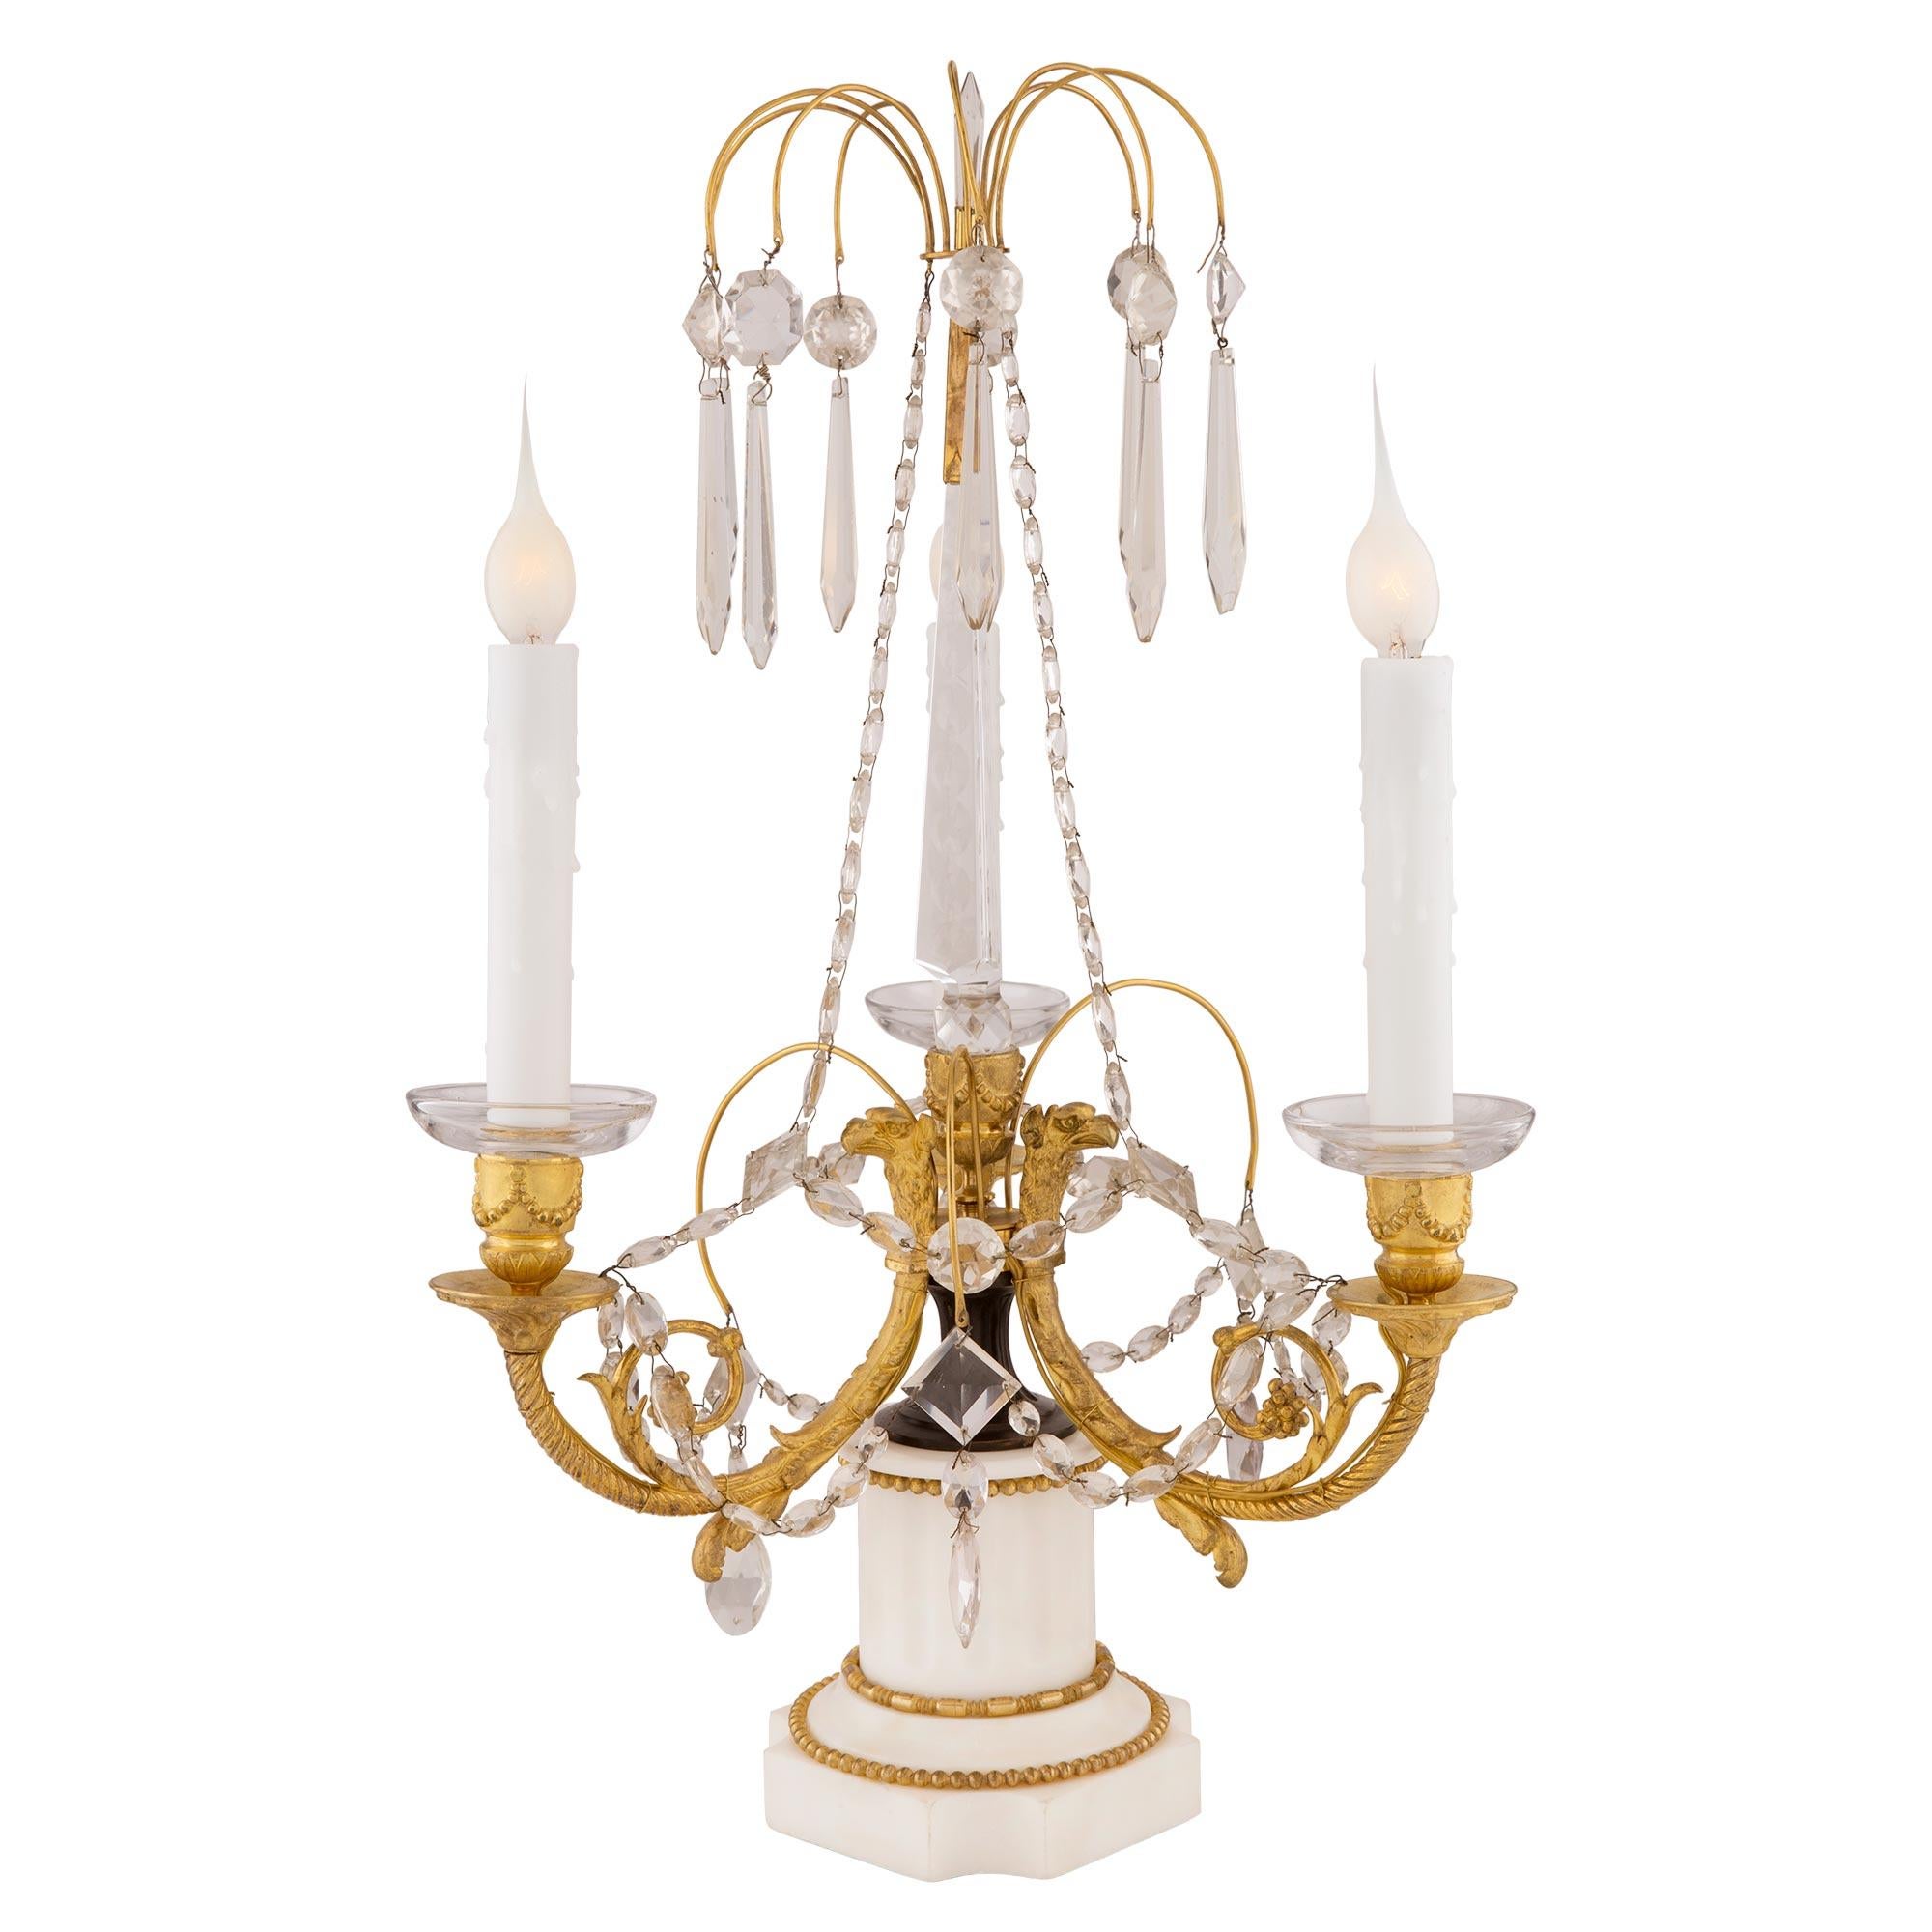 A most elegant pair of Russian early 19th century Neo-Classical st. ormolu, crystal and white Carrara marble three arm Girandole lamps. Each Girandole is raised by a square white Carrara marble base with concave corners, a mottled design and wrap